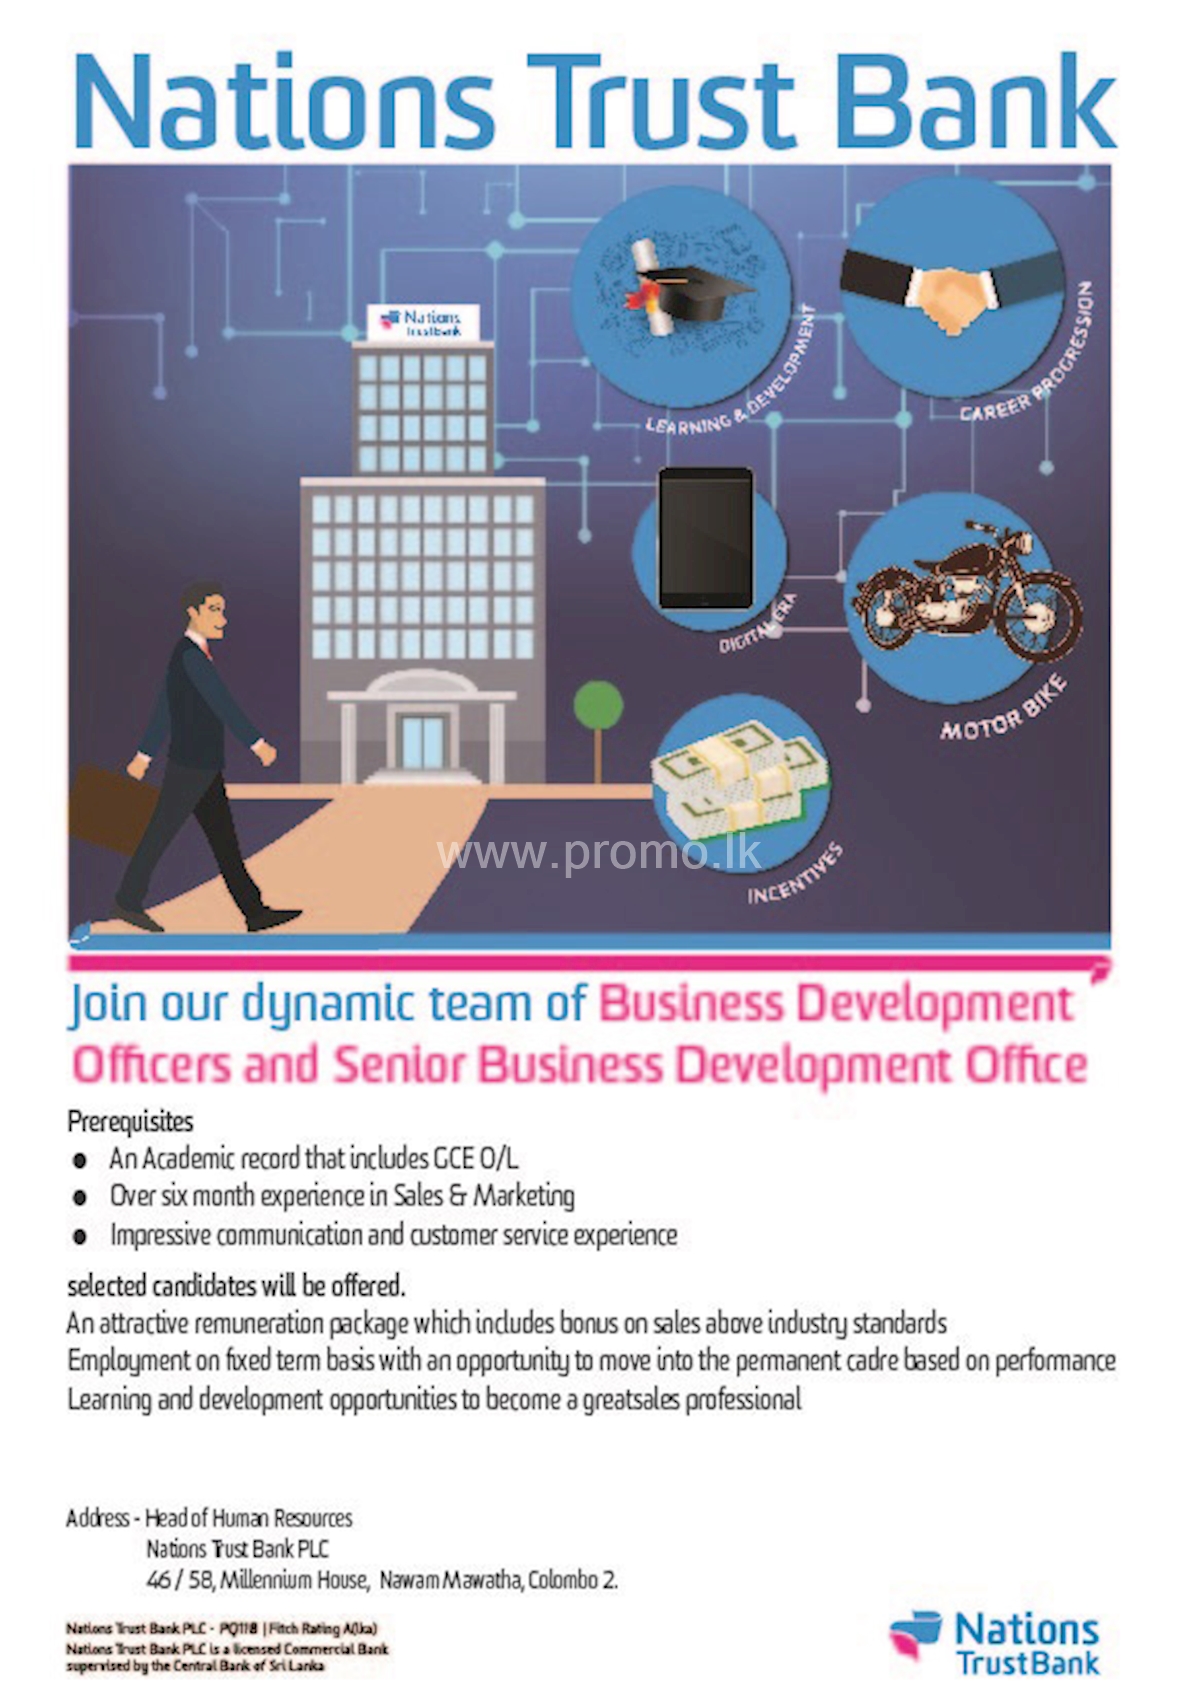 Business Development Officers and Senior Business Development Officer